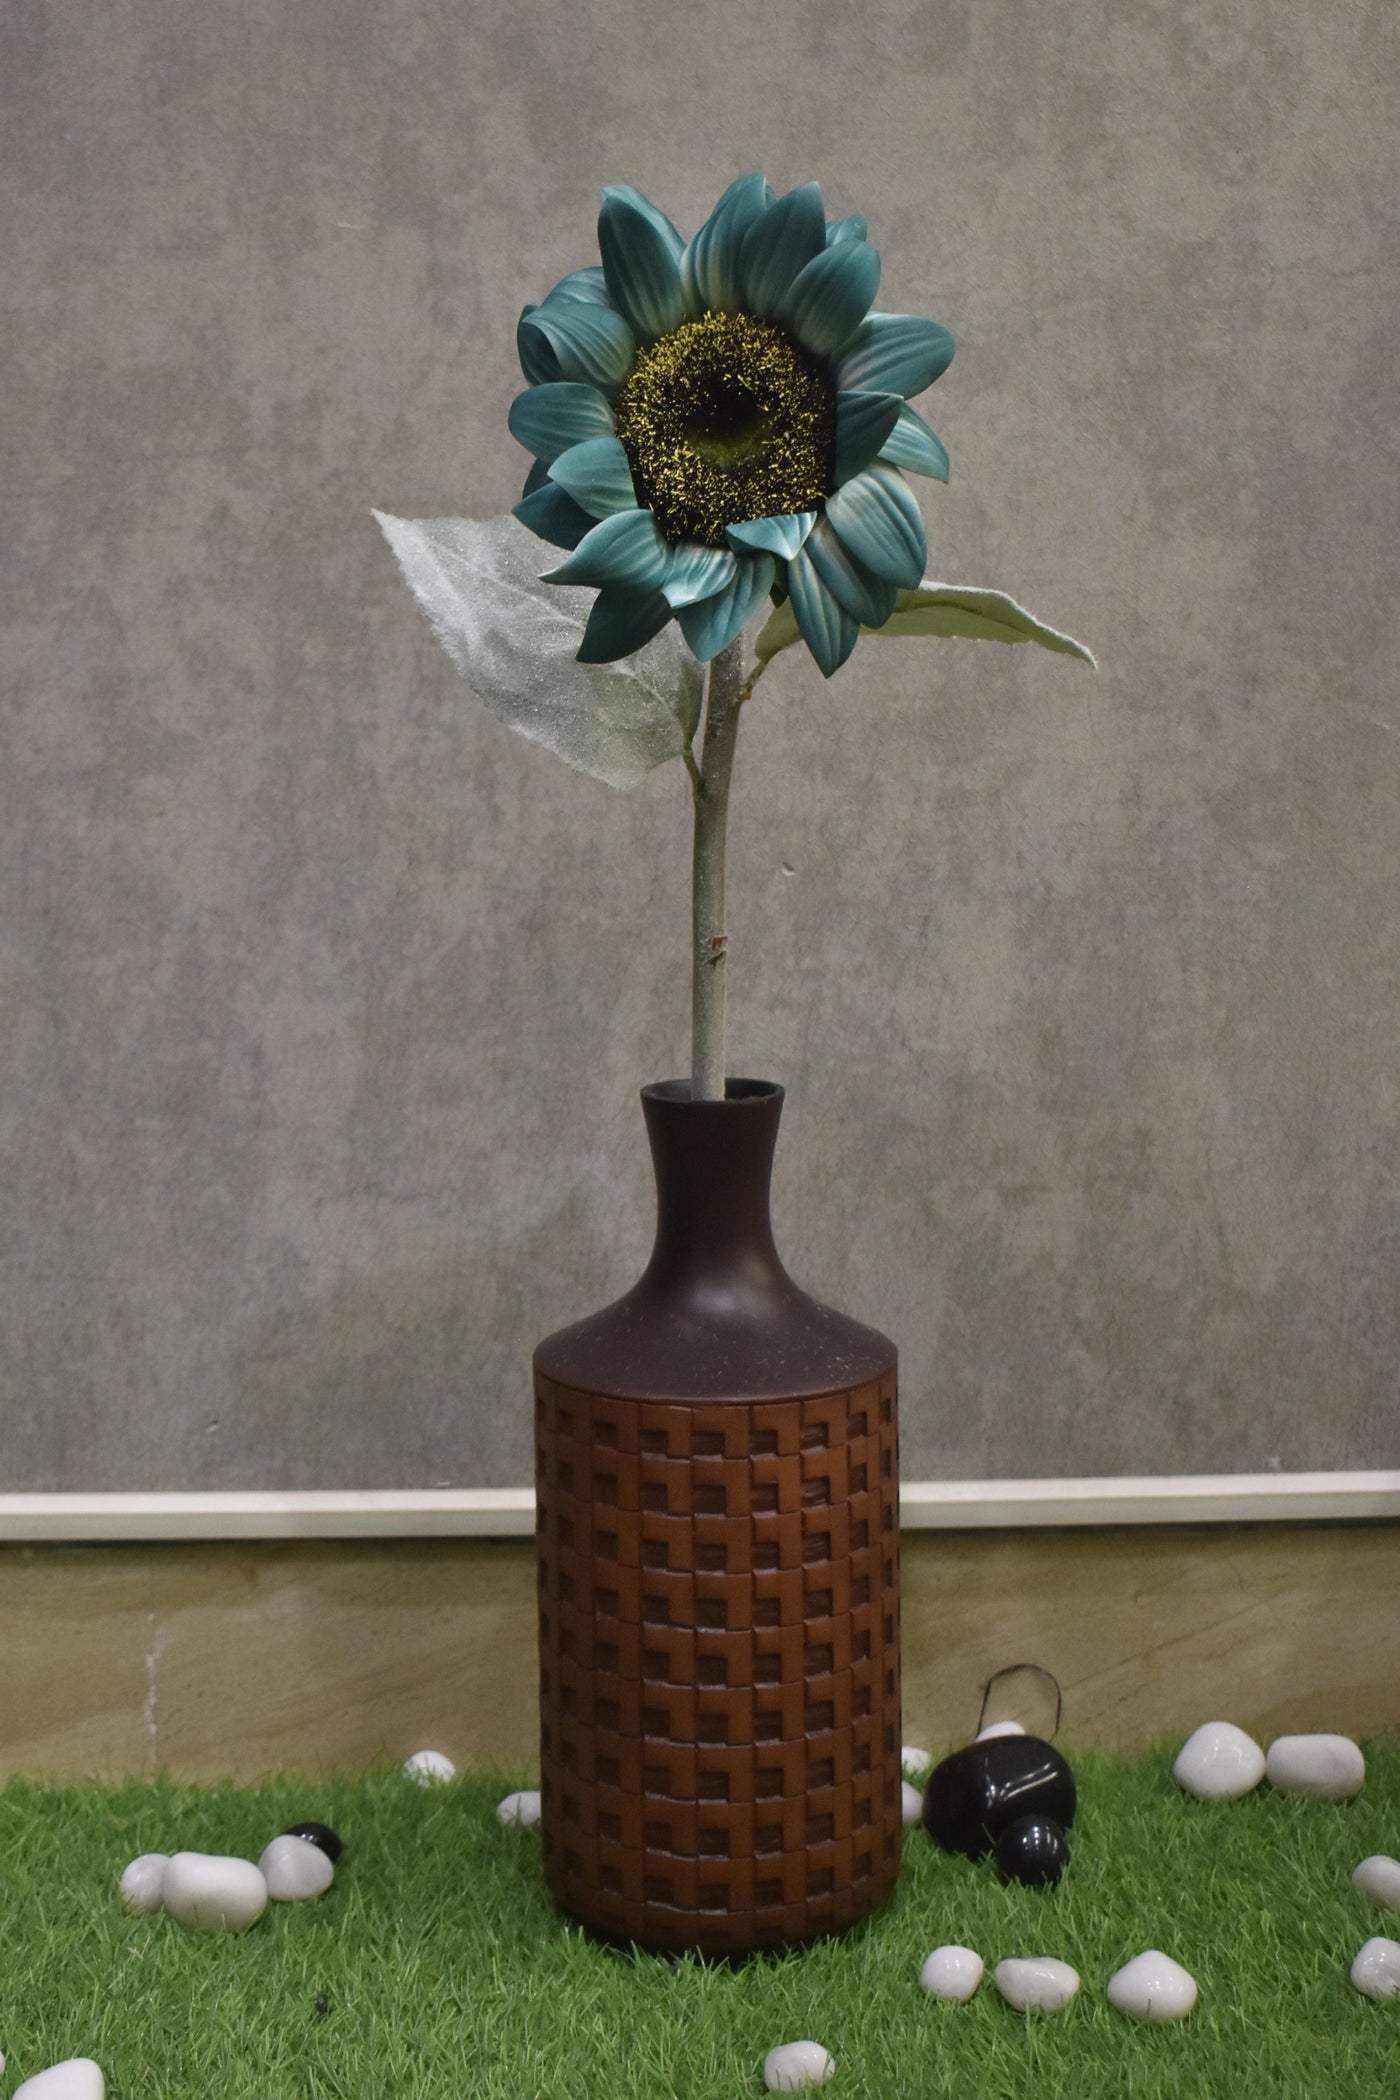 Artificial Sunflowers for your home or office decor